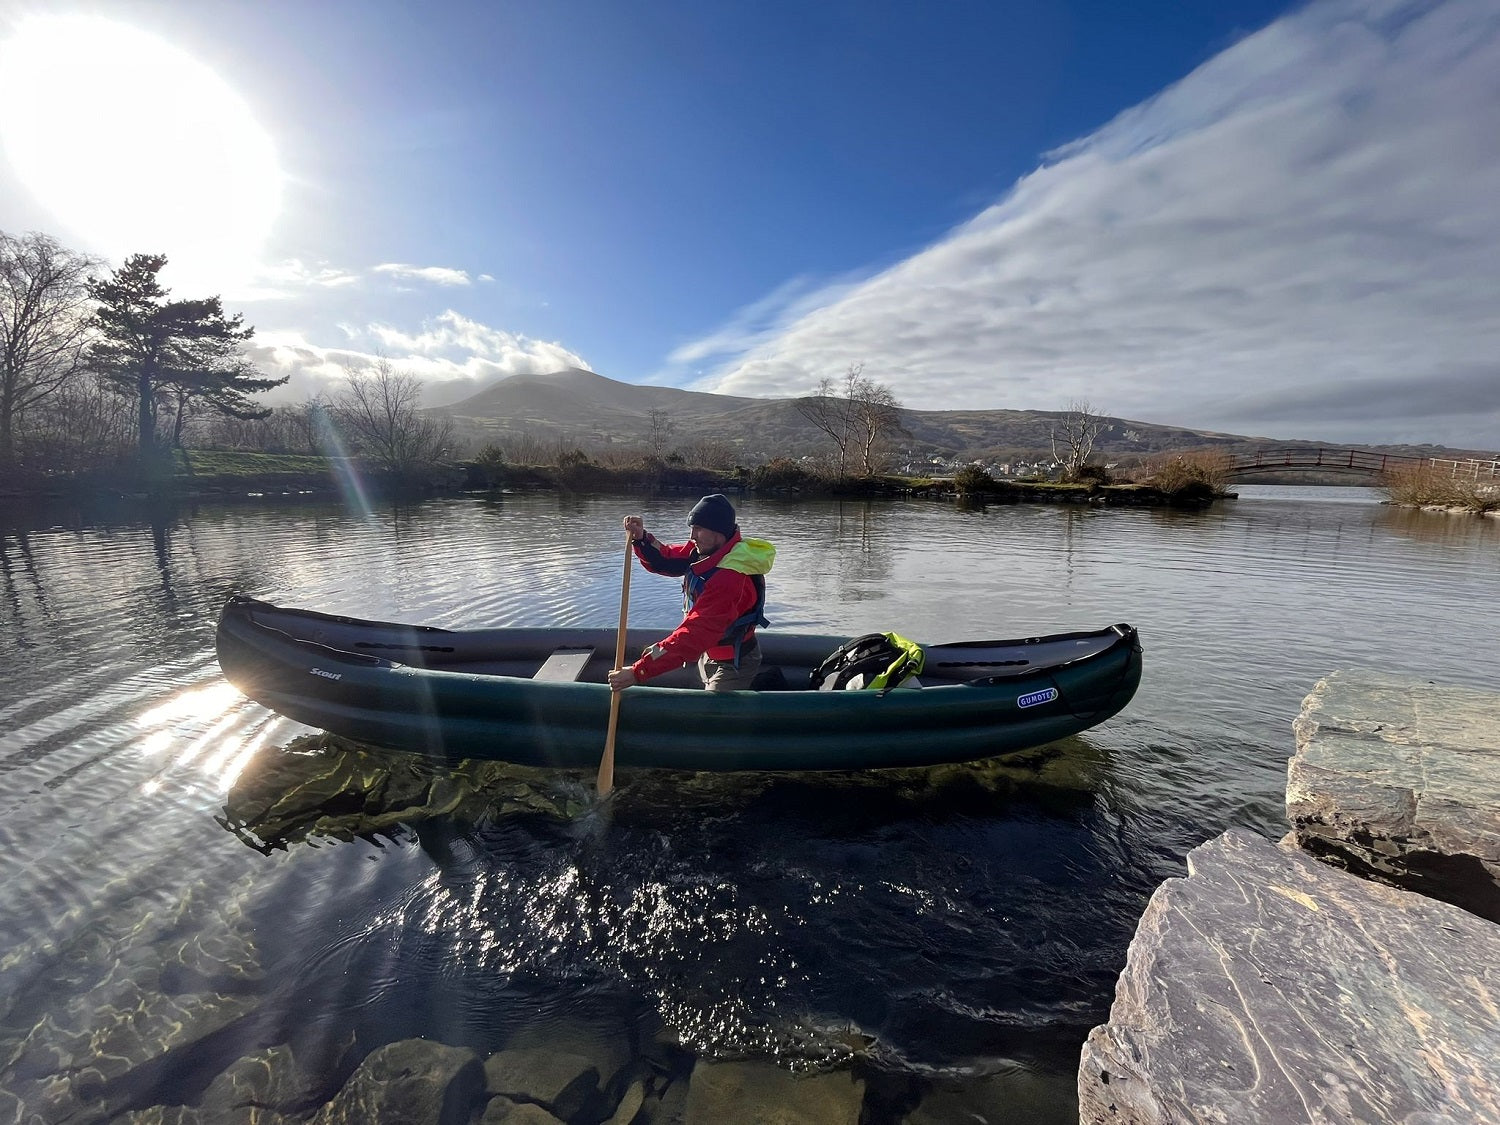 Solo paddling the Gumotex Inflatable Canoe